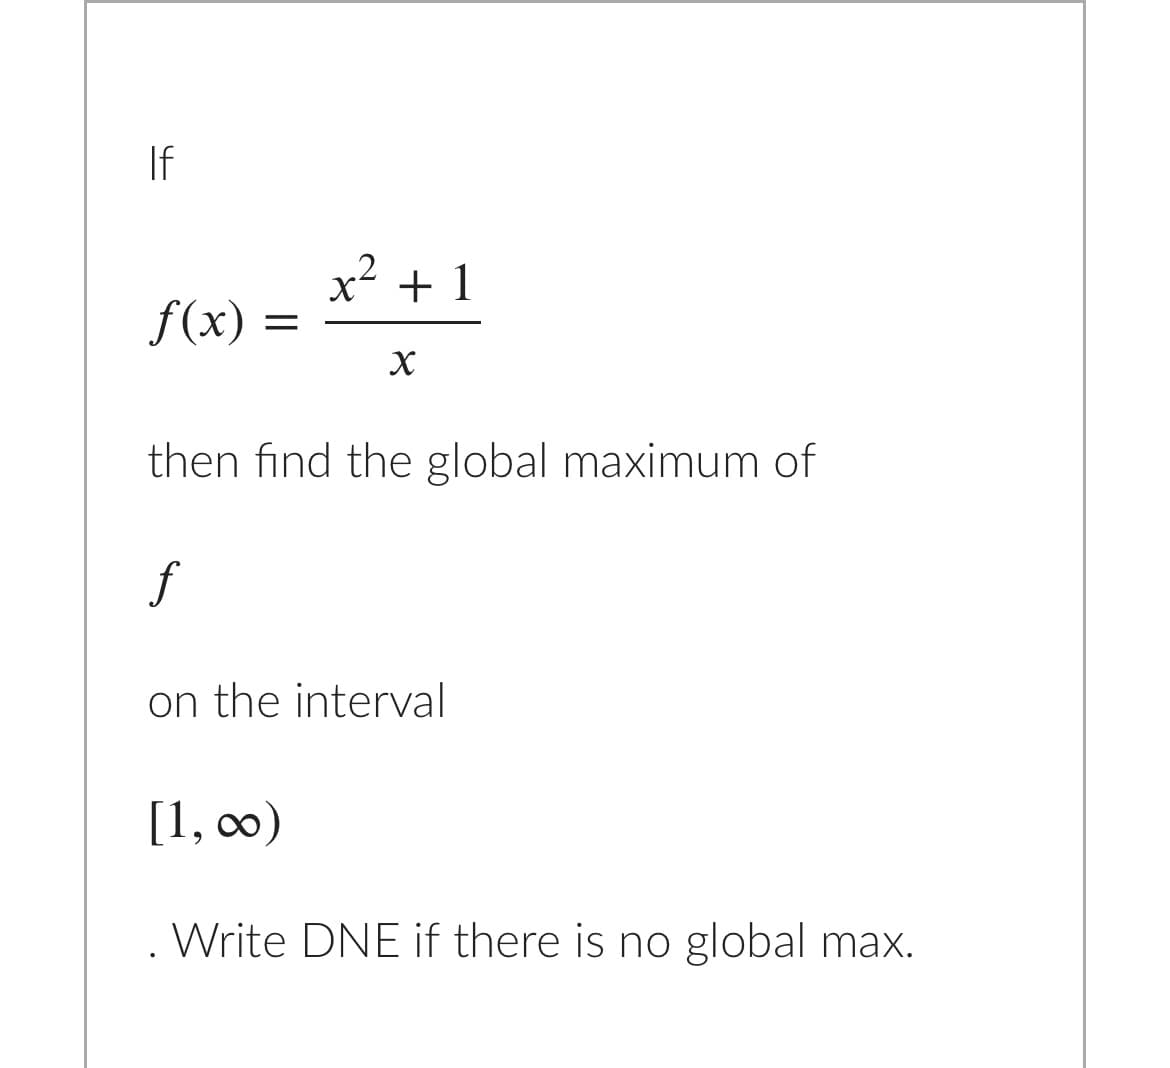 If
x² + 1
f(x)
then find the global maximum of
f
on the interval
[1, 0)
Write DNE if there is no global max.
